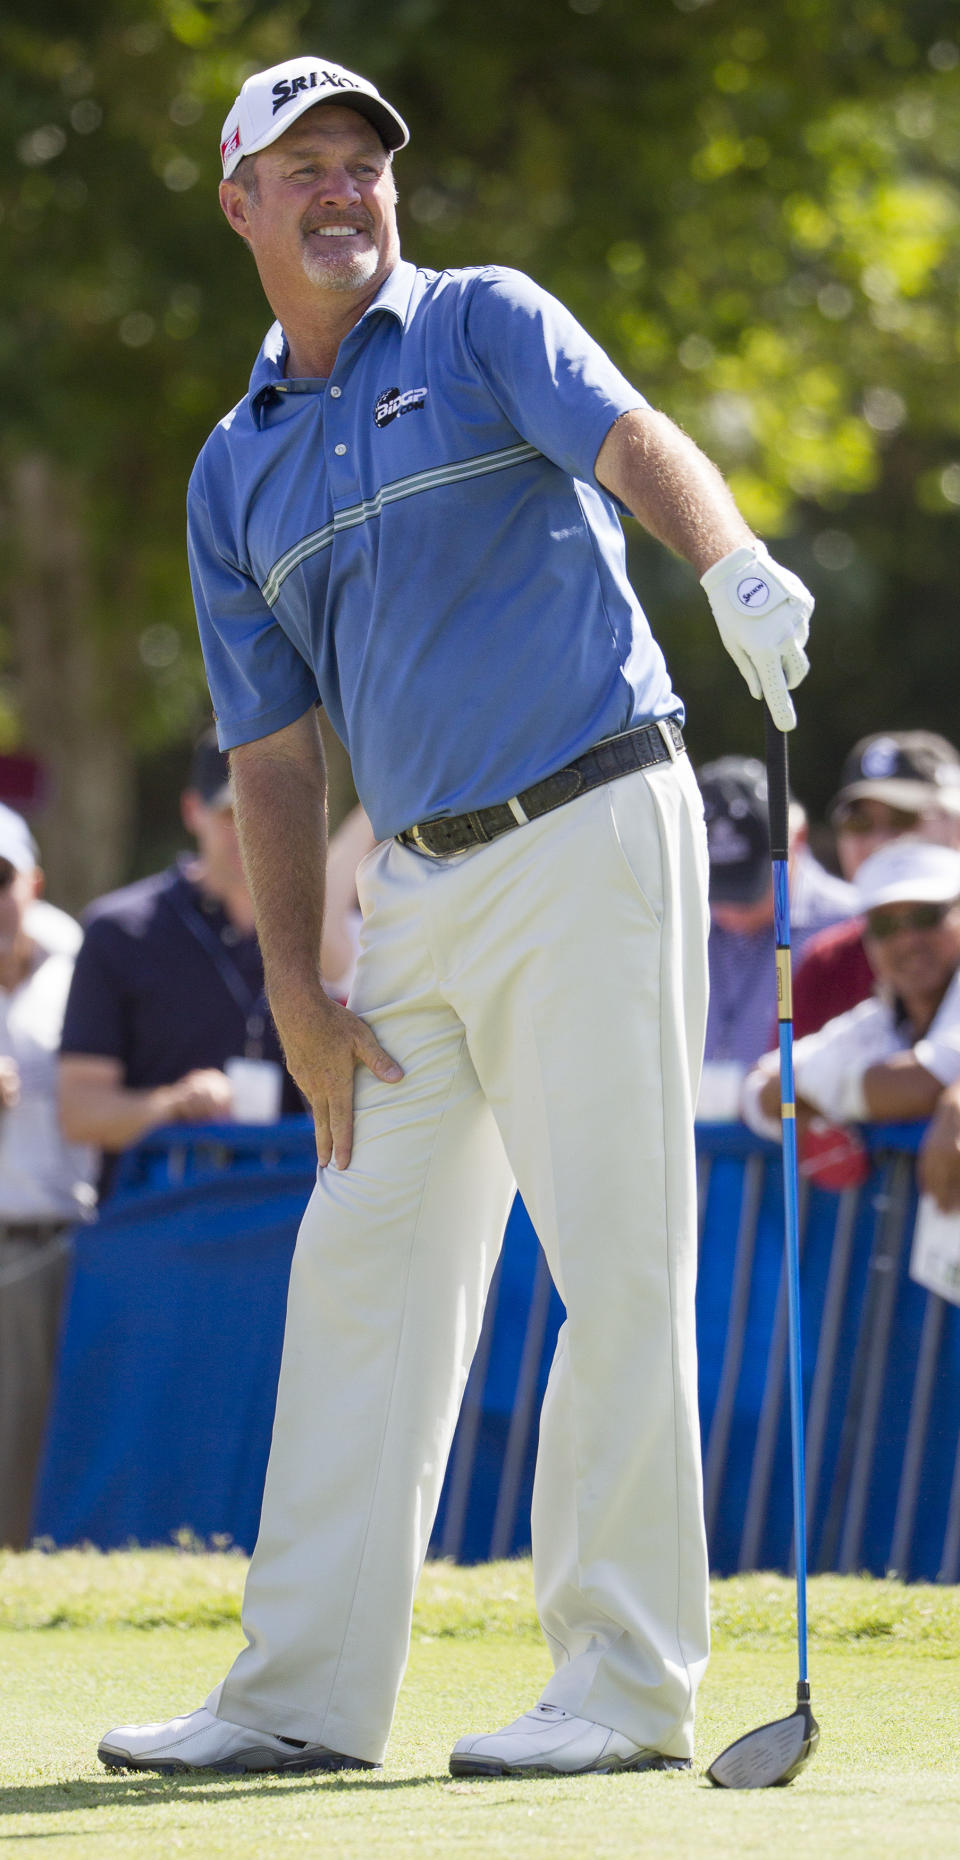 Jerry Kelly watches his drive off the first tee during the fourth round of the Sony Open golf tournament at Waialae Country Club, Sunday, Jan. 12, 2014, in Honolulu. (AP Photo/Eugene Tanner)